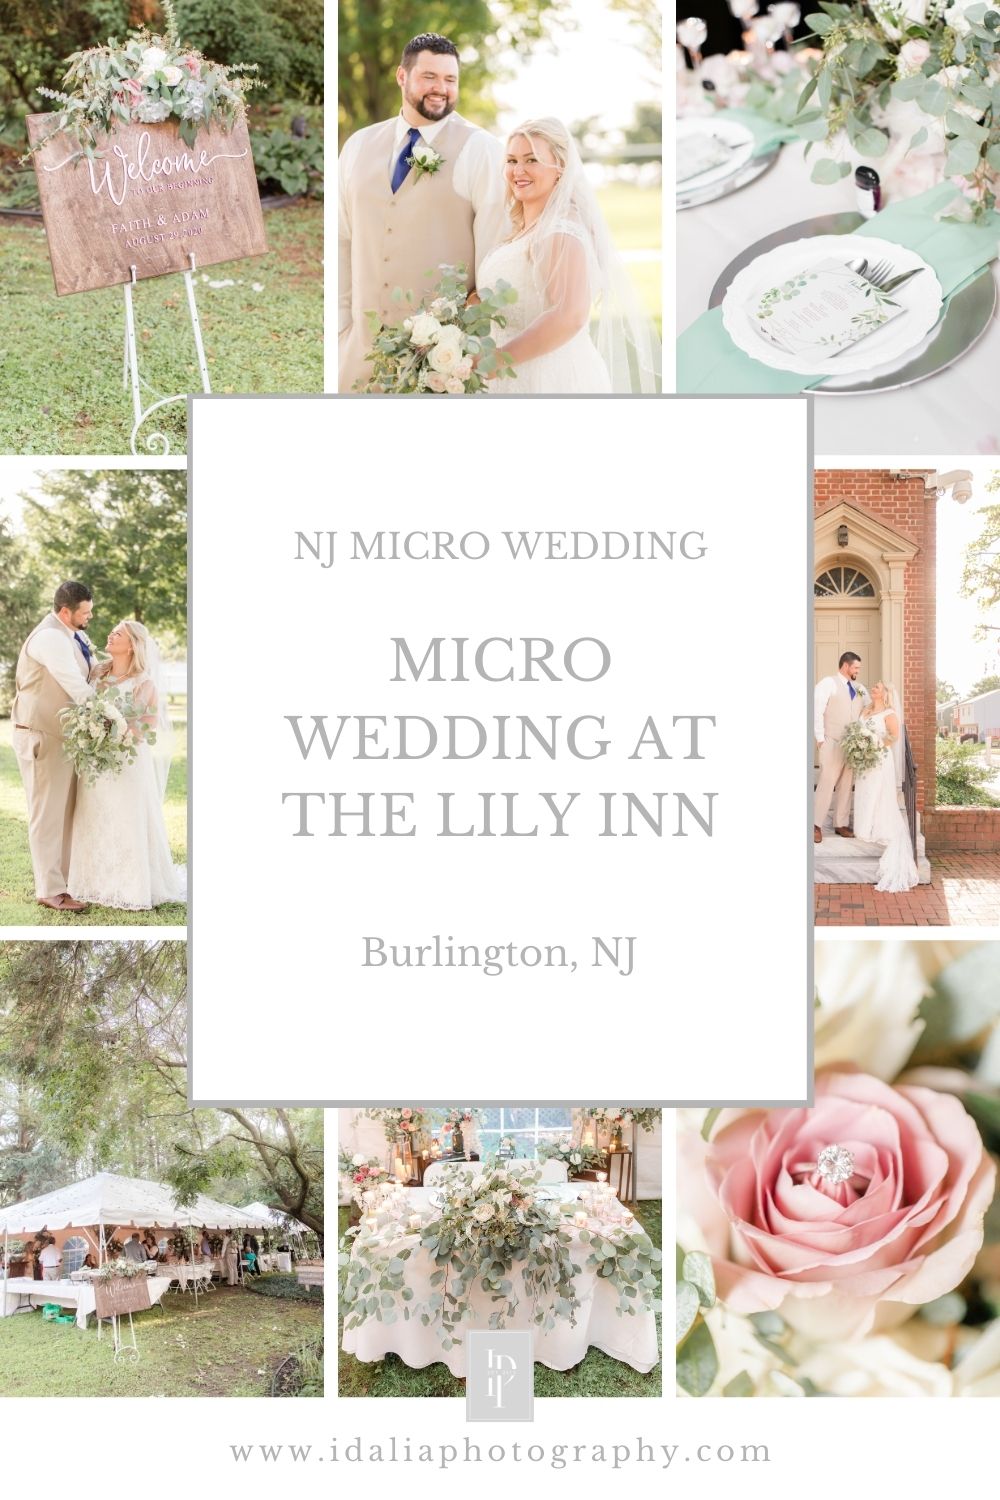 Microwedding at the Lily Inn